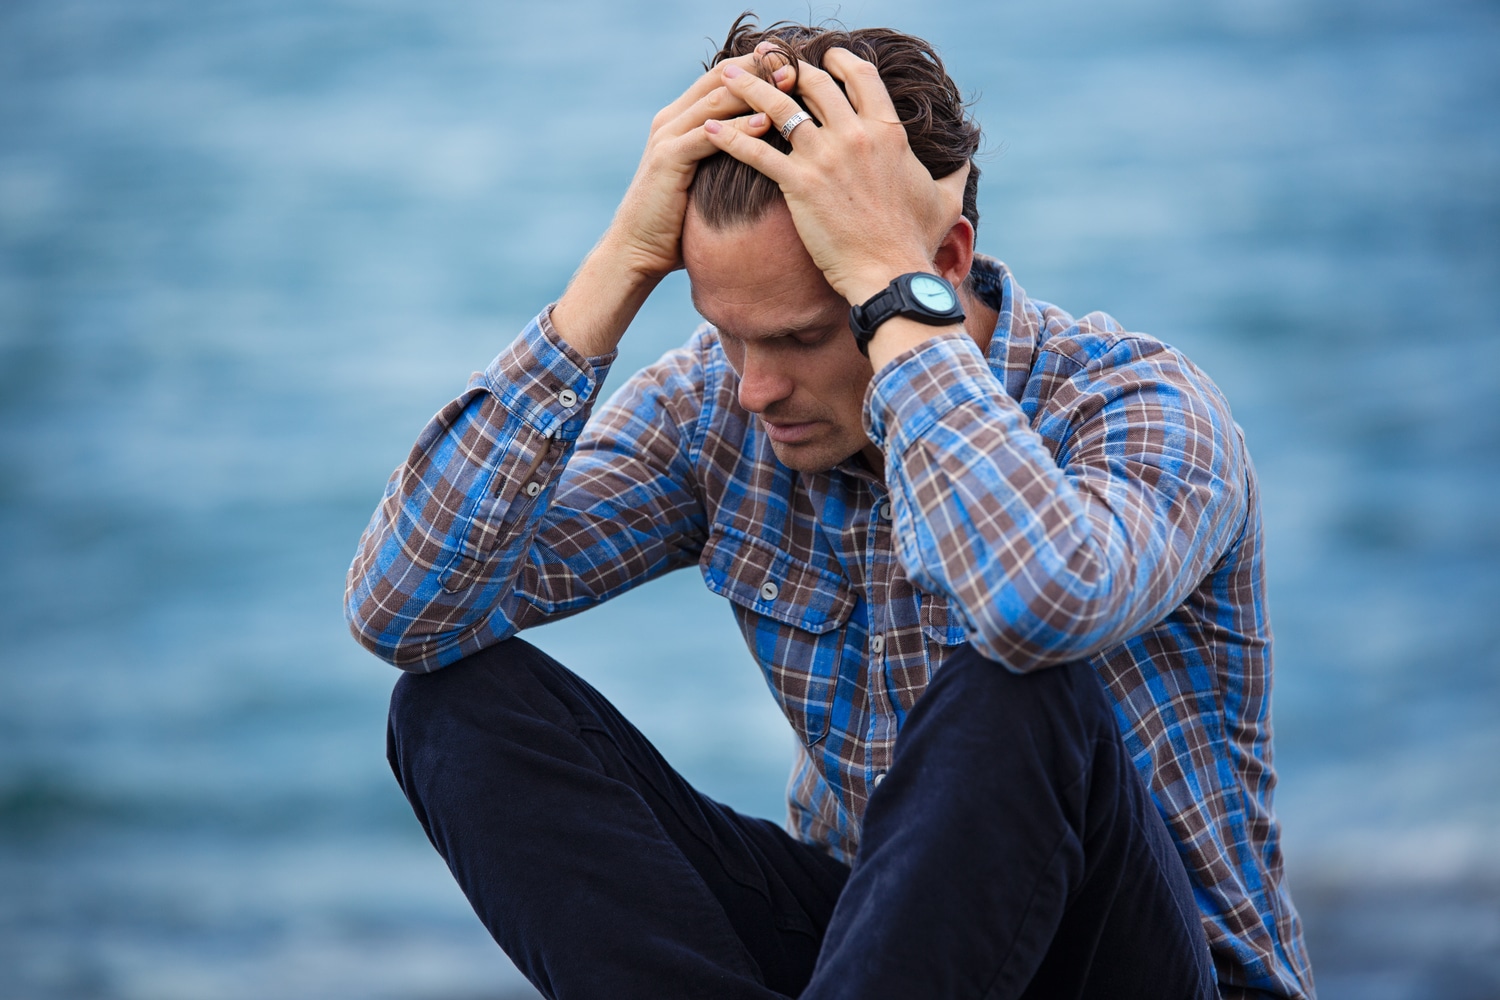 Can I Get Compensation for Emotional Distress in Texas After a Car Accident?